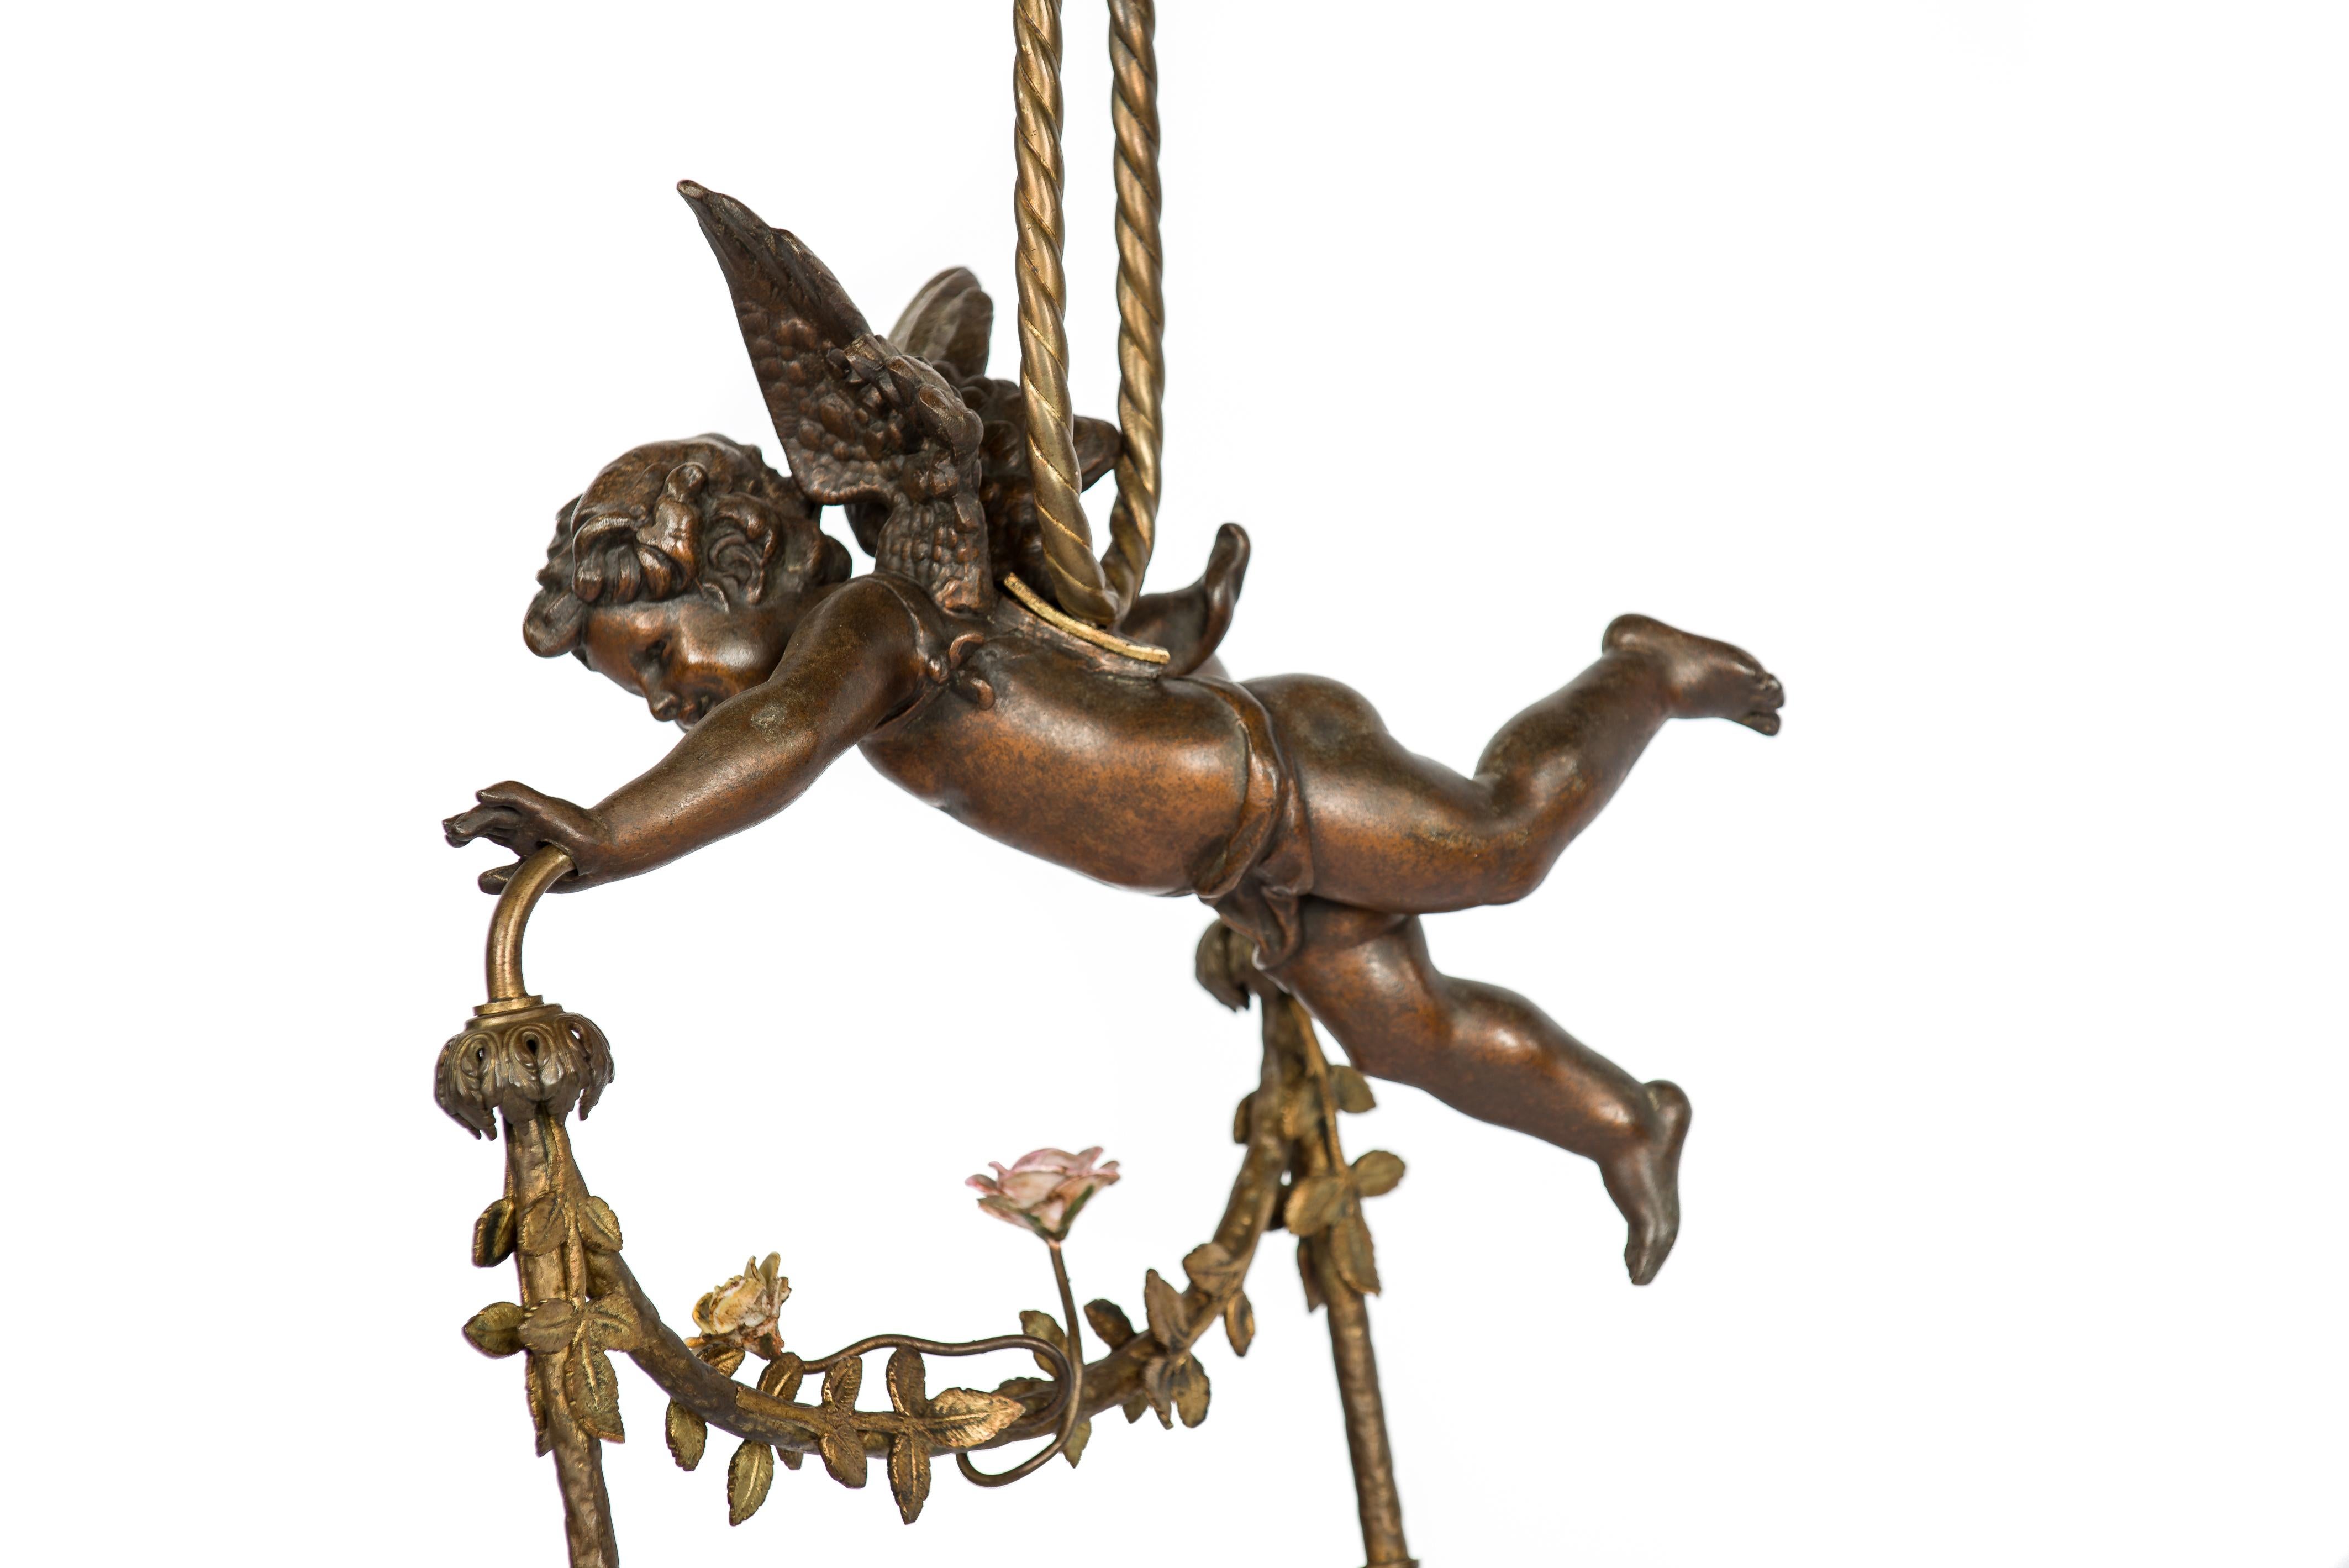 A classic cast brass angel or putti pendant light made in France in the late 19th century circa 1890.
The angel, also known as a cherub holds a delicate floral garland adorned with two delicate porcelain flowers and ends in two etched glass shades